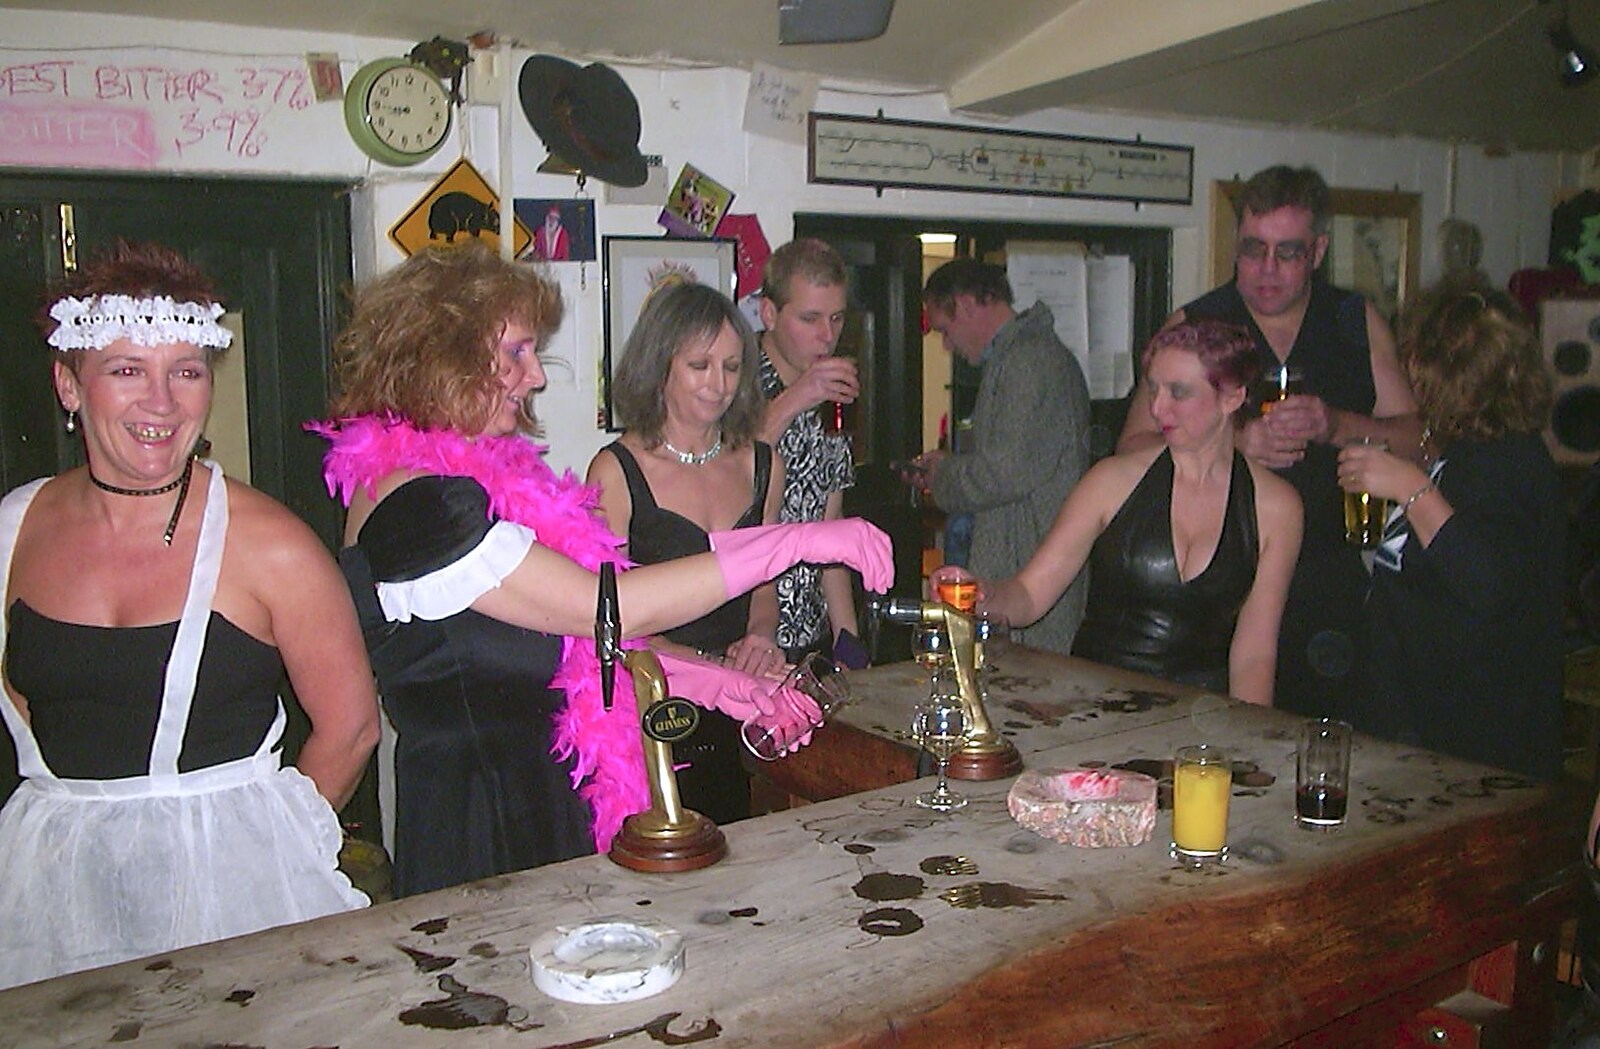 The Shed's bar from The BBs do New Year's Eve at The Cider Shed, Banham, Norfolk - 31st December 2003